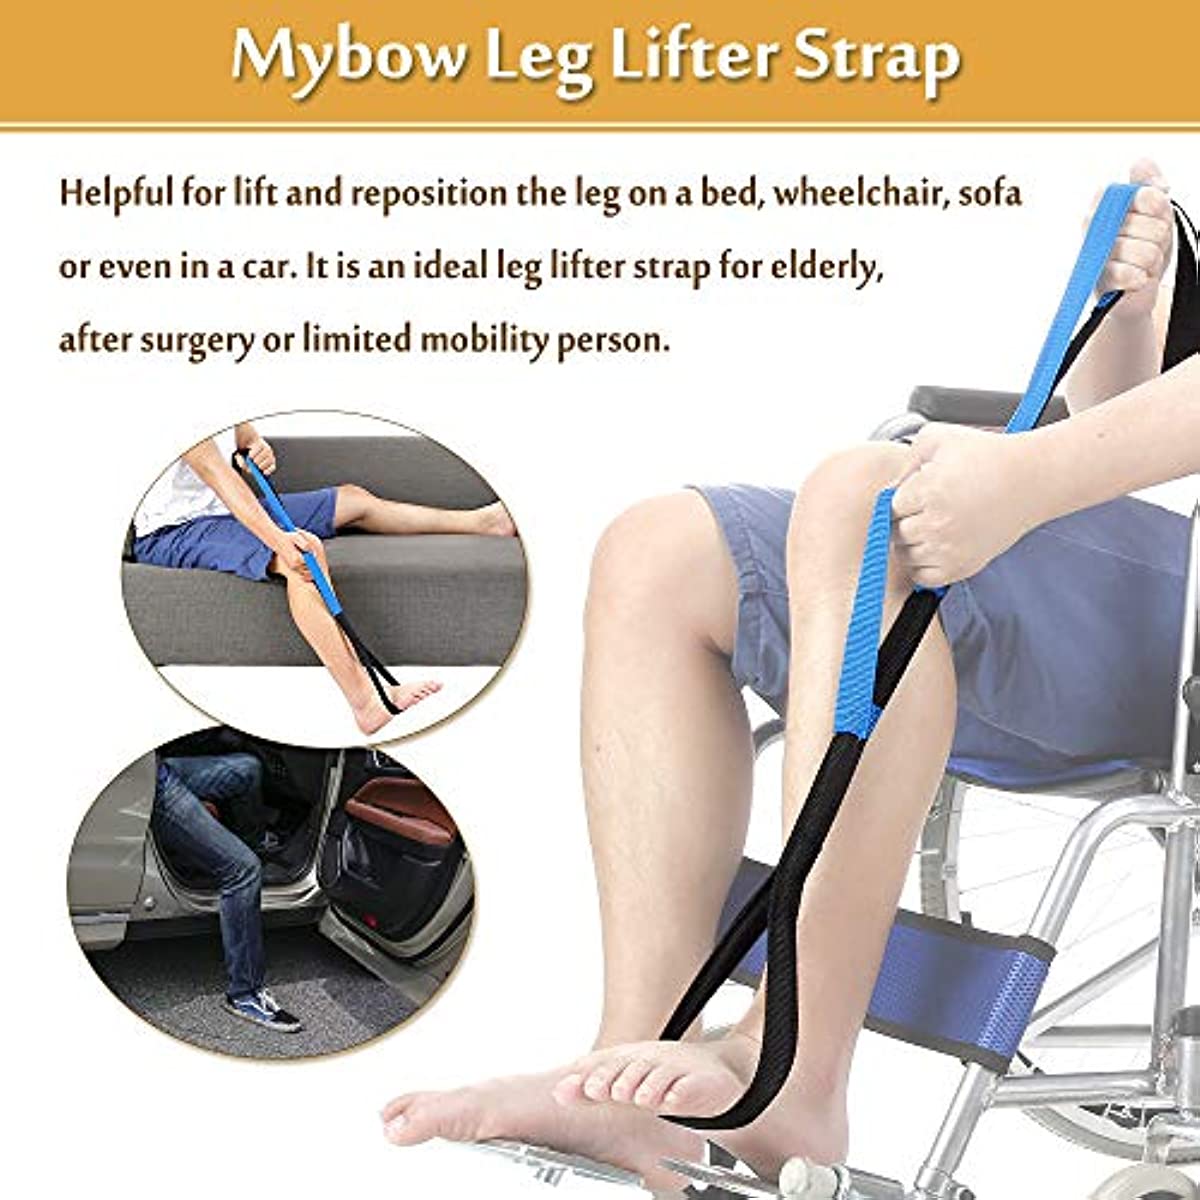 Leg Lifter Strap Rigid Foot 37\'\' Medical Thigh Lifter for Elderly After Knee Hip Surgery Recovery Kit & Hand Grip Therapy Tools Handicap Disability Mobility Aids for Car Bed Wheelchair Transfer (Blue)